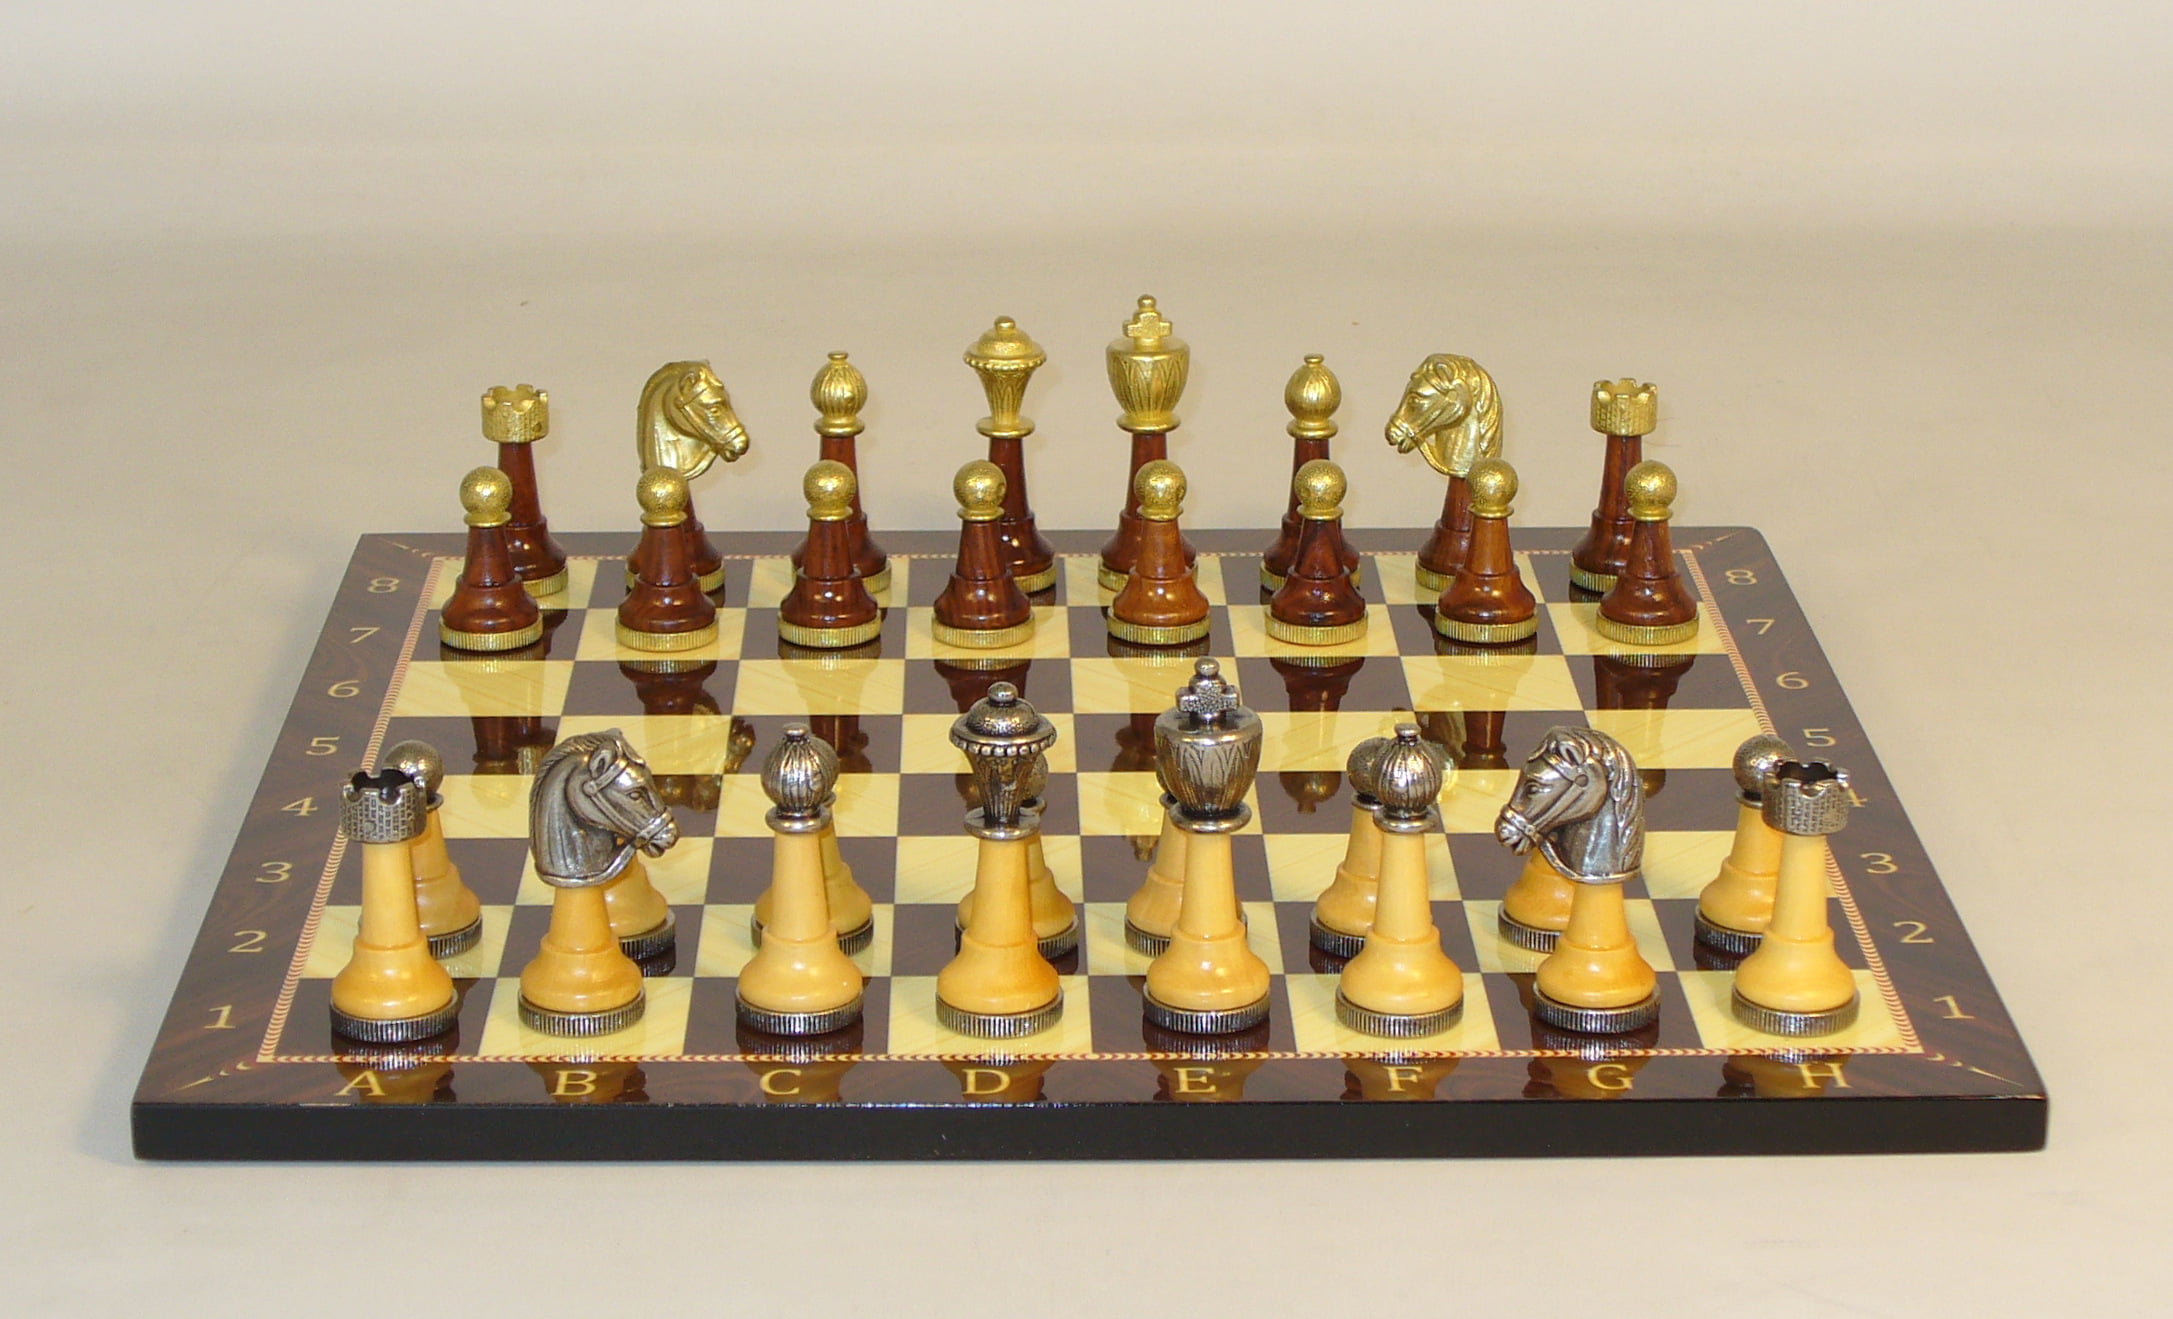 Golden Rosewood Chess Pieces Storage Box For chessmen set upto 4.5 inch